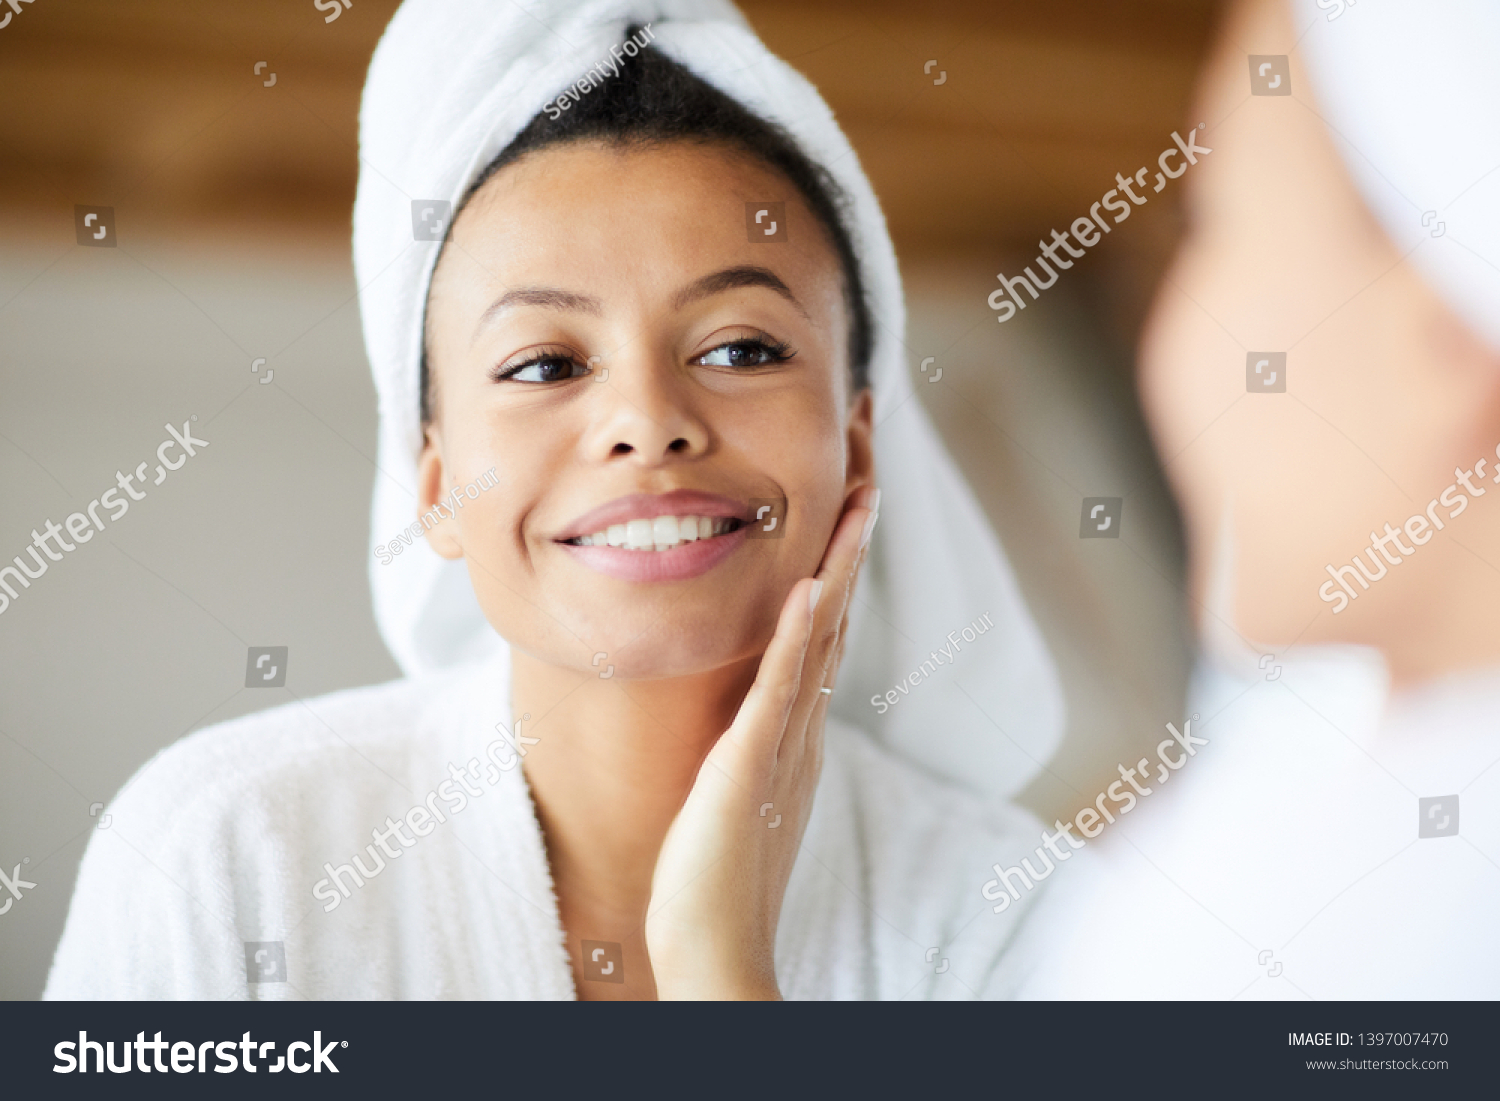 Head and shoulders portrait of  smiling Mixed-Race woman looking in mirror during morning routine, copy space #1397007470